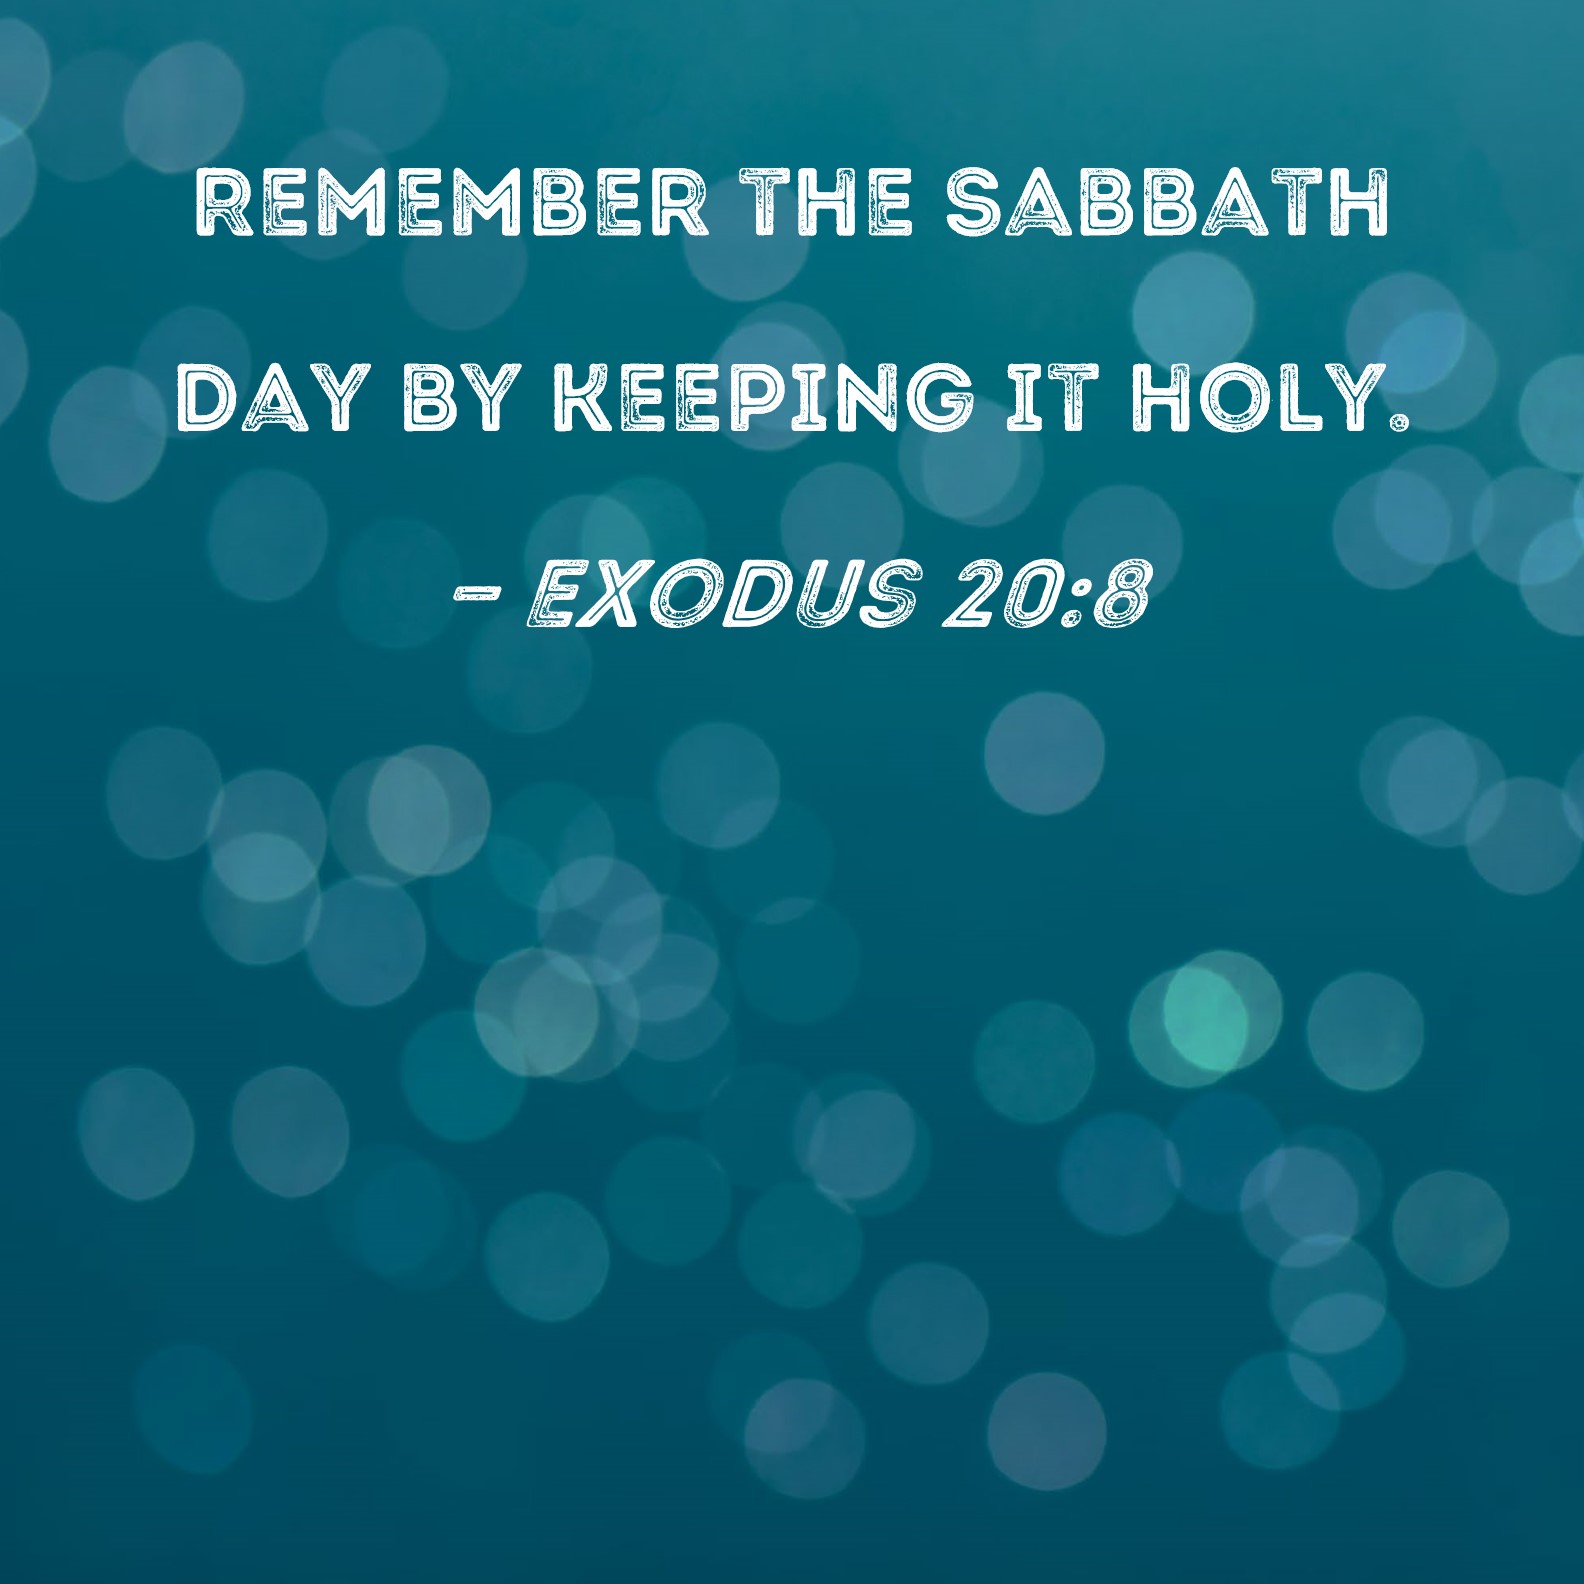 remember-the-sabbath-day-to-keep-it-holy-exodus-20-8-happy